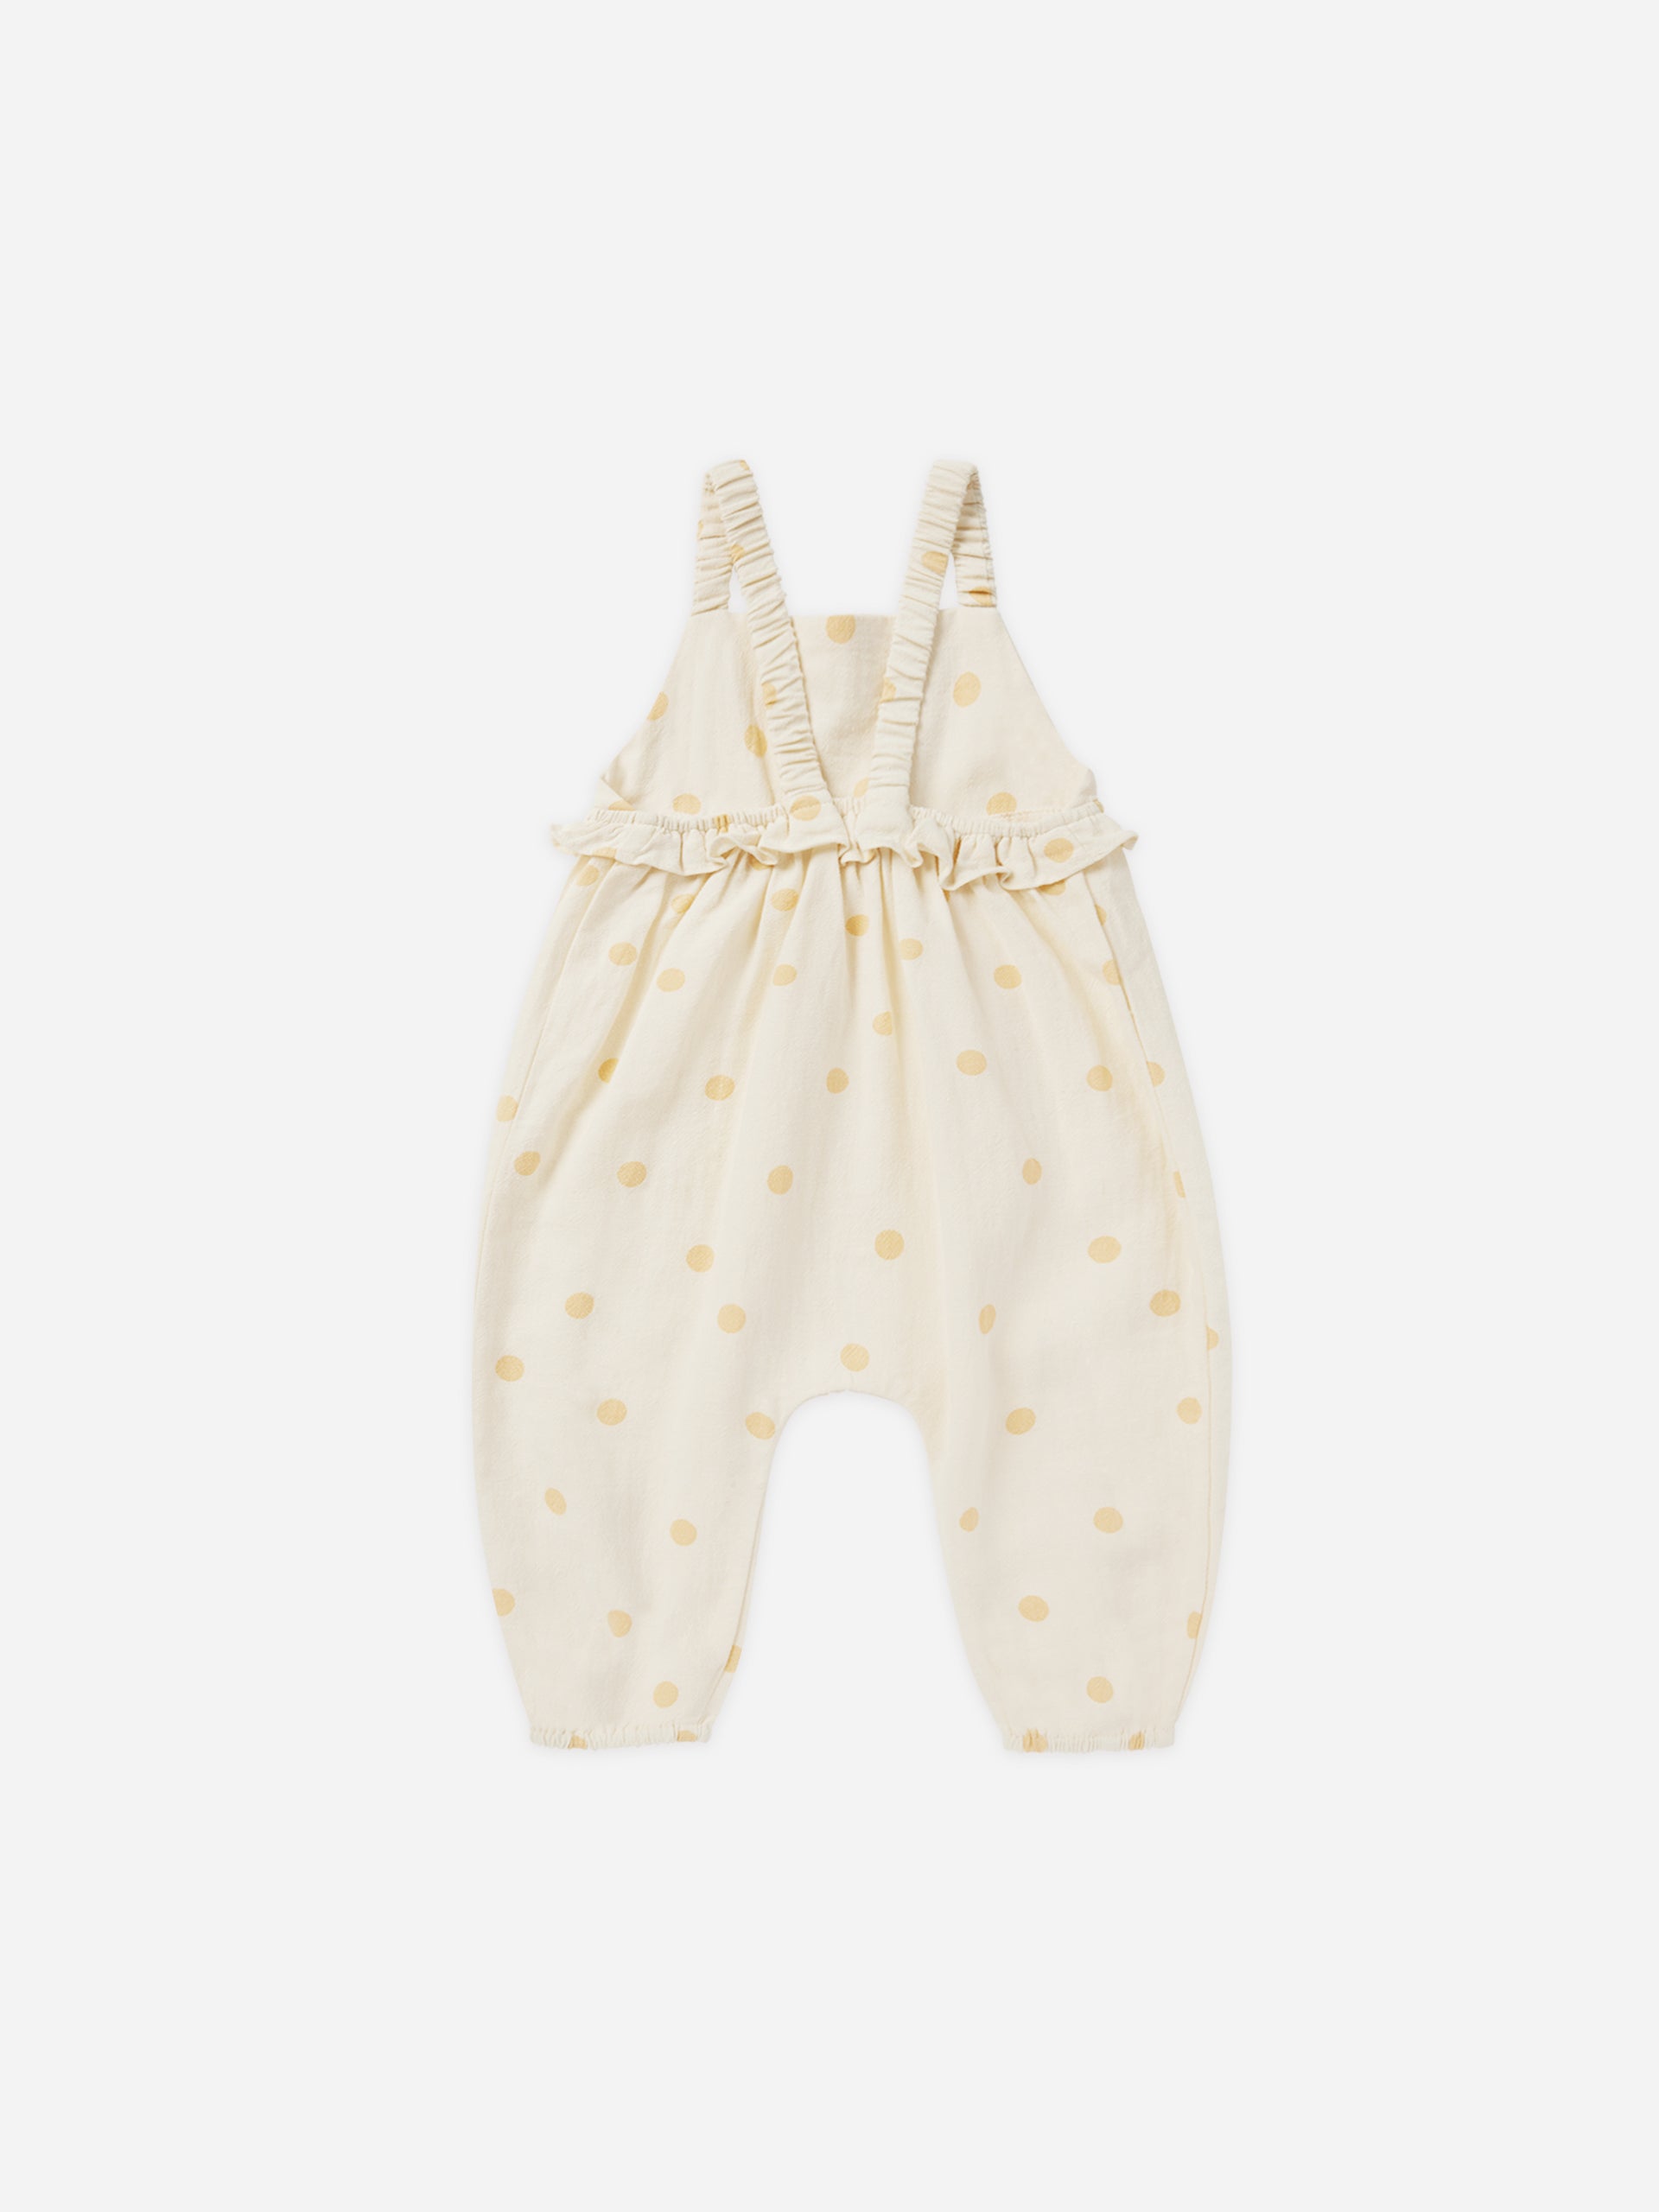 Kinsley Jumpsuit || Yellow Polka Dot - Rylee + Cru | Kids Clothes | Trendy Baby Clothes | Modern Infant Outfits |